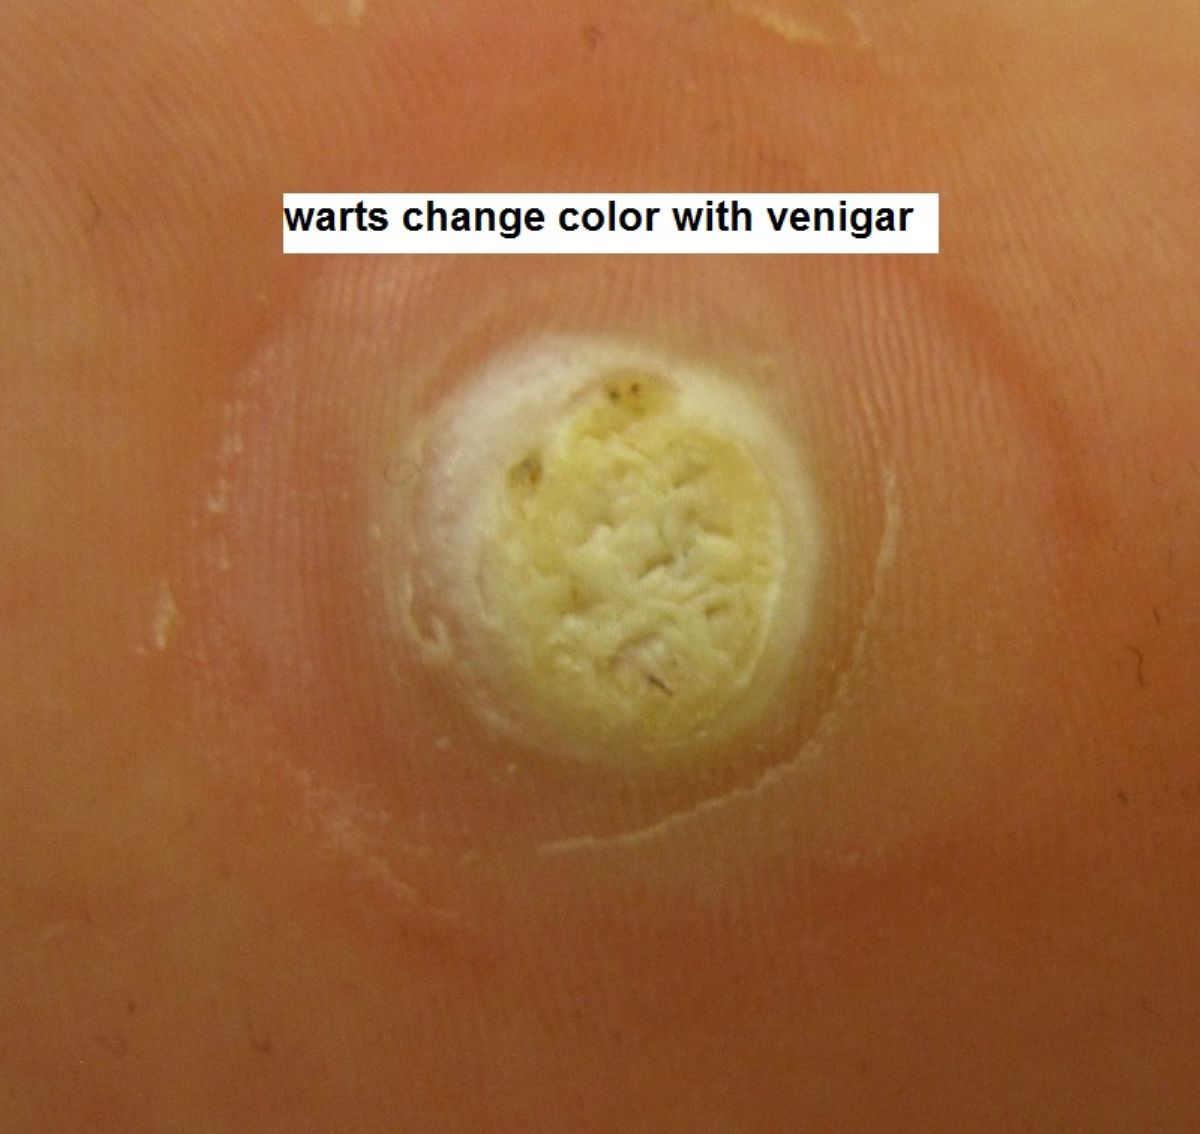 Hpv warts falling off